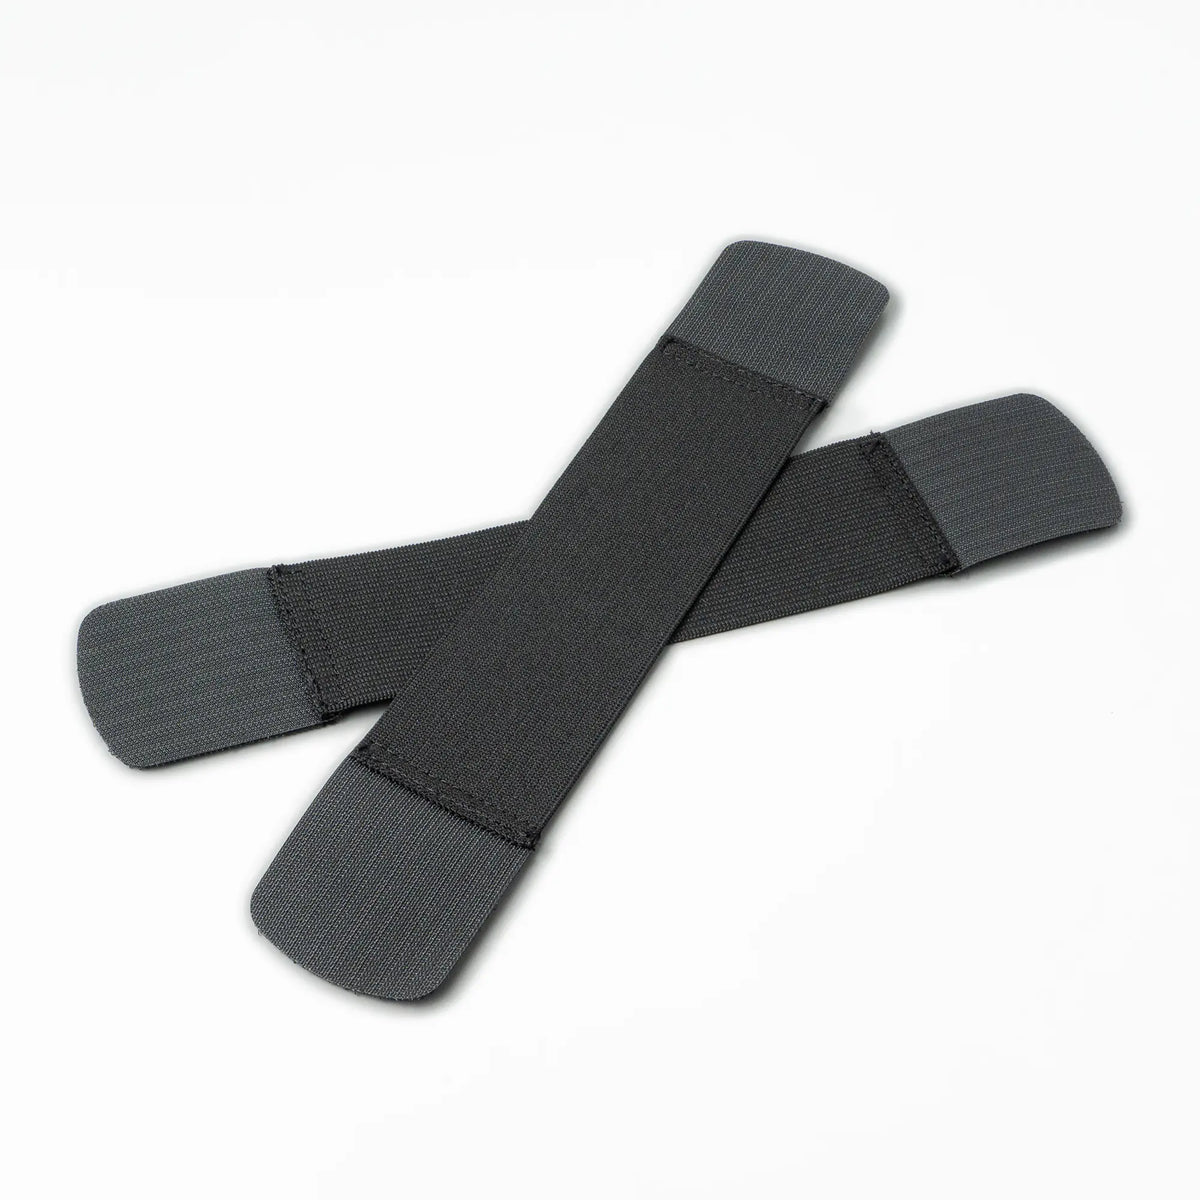 Concealable Carrier Velcro Straps (Set of 4)